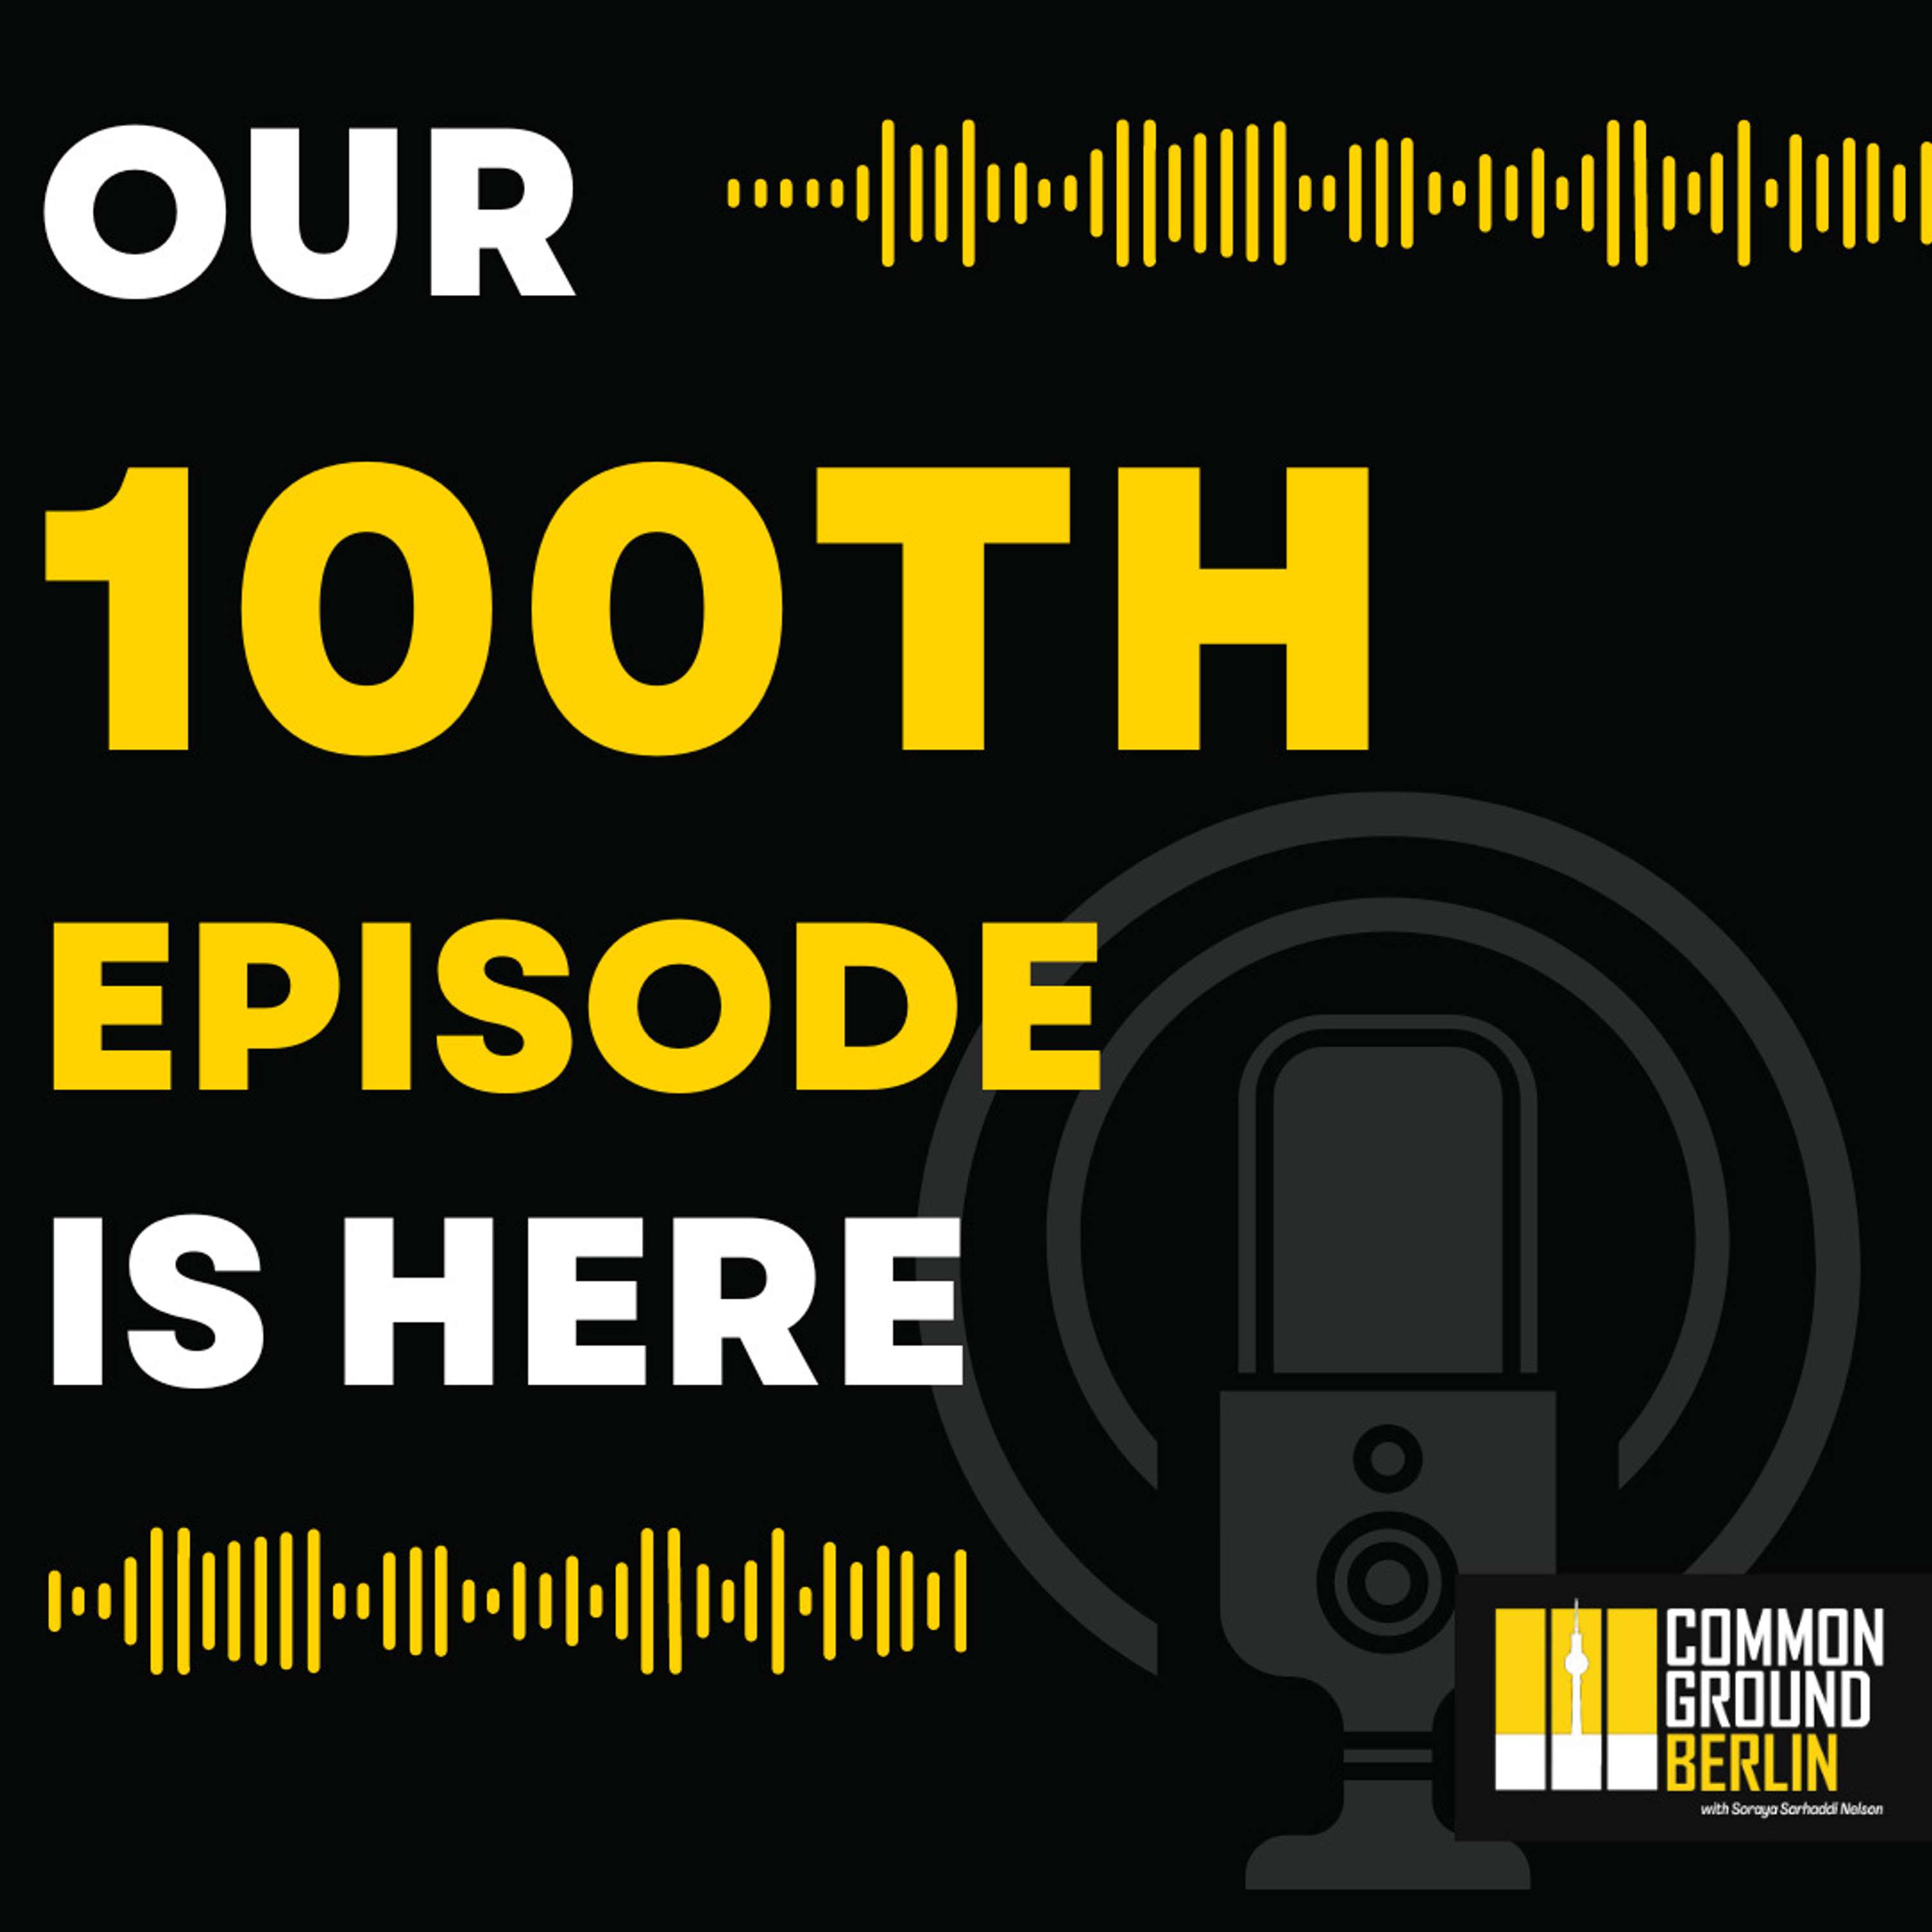 Our 100th Episode